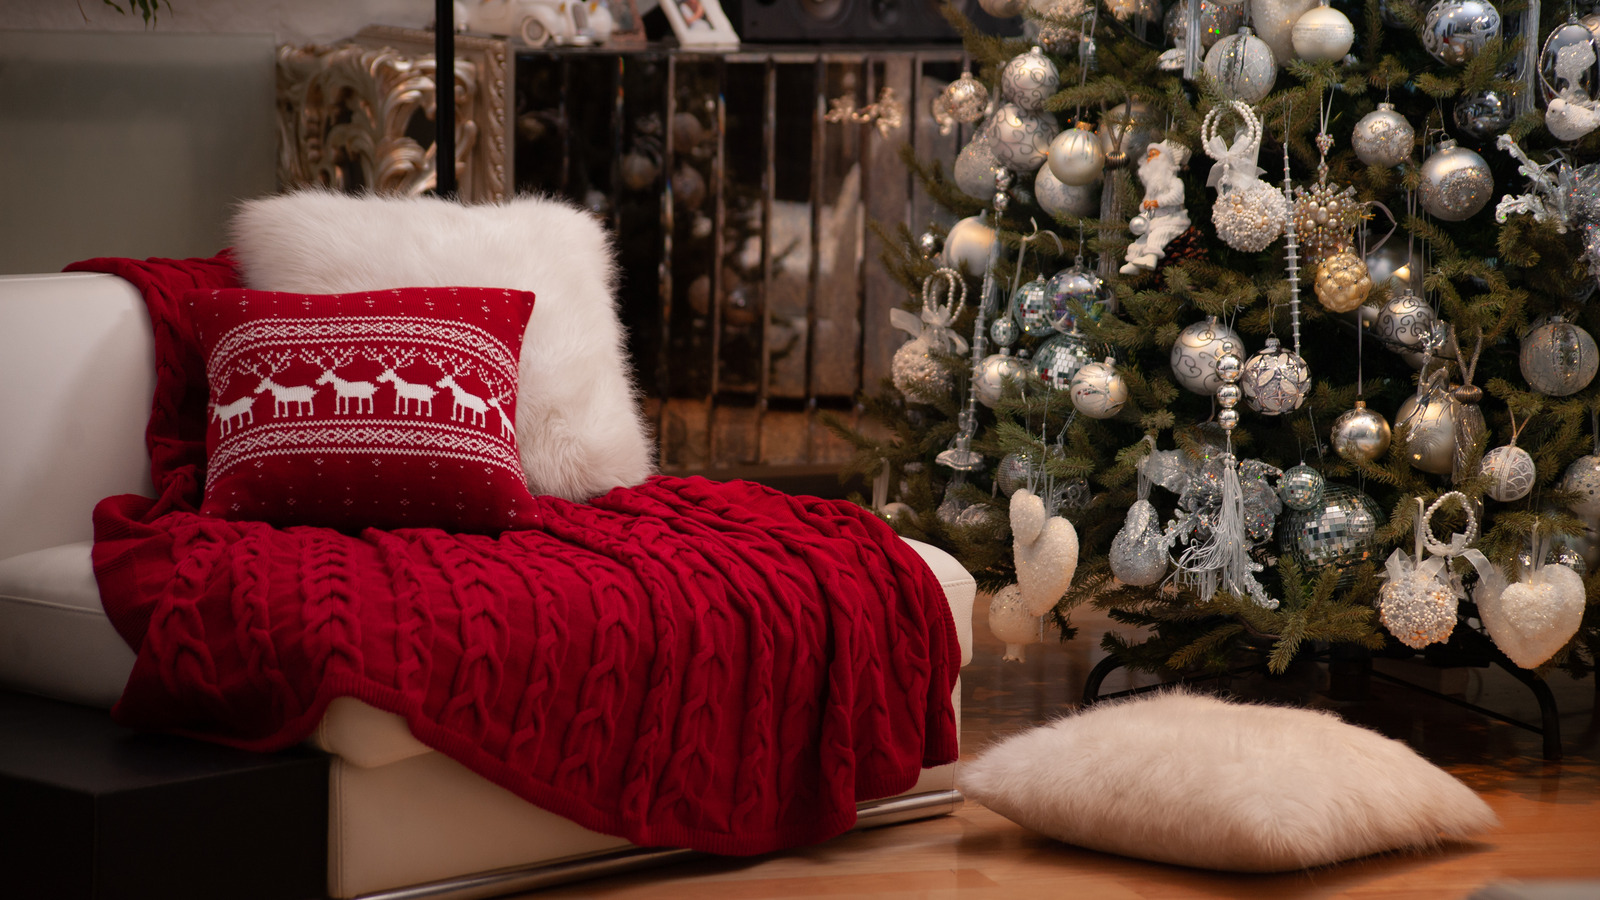 https://www.housedigest.com/img/gallery/give-your-living-room-a-cozy-christmas-update-with-jenn-todryks-simple-tip/l-intro-1701384400.jpg